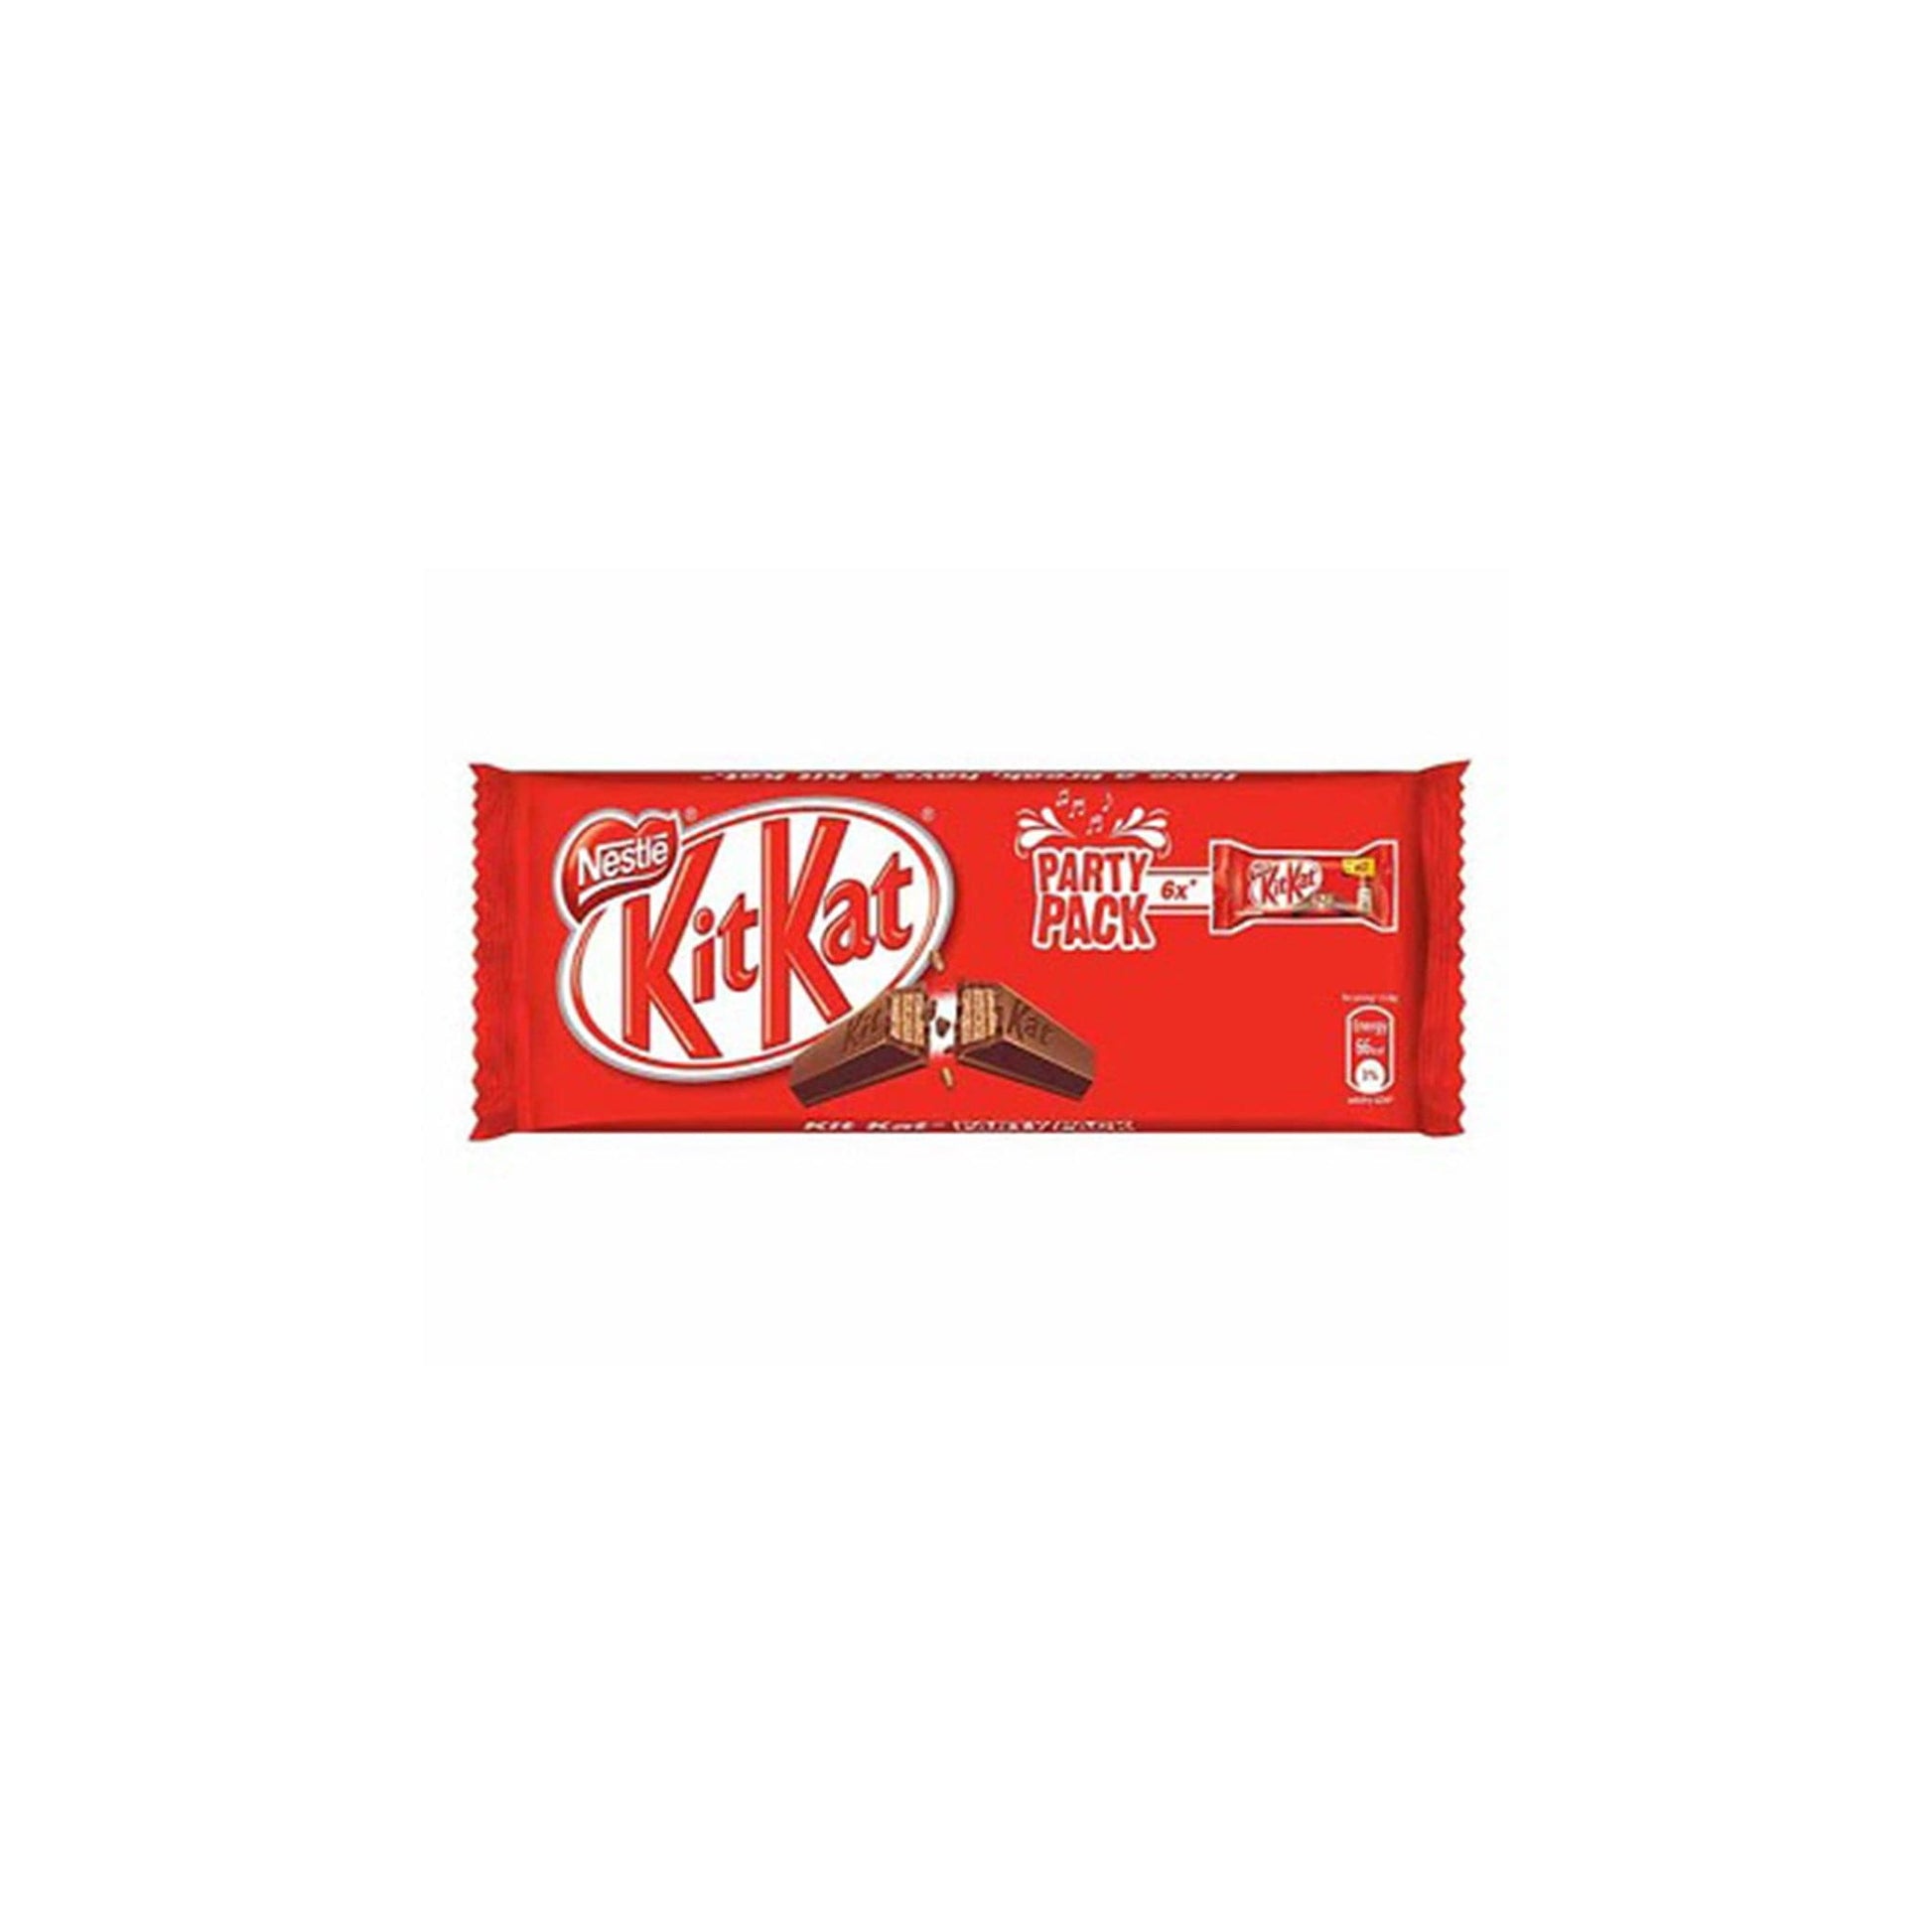 KitKat party pack (7036973285563)